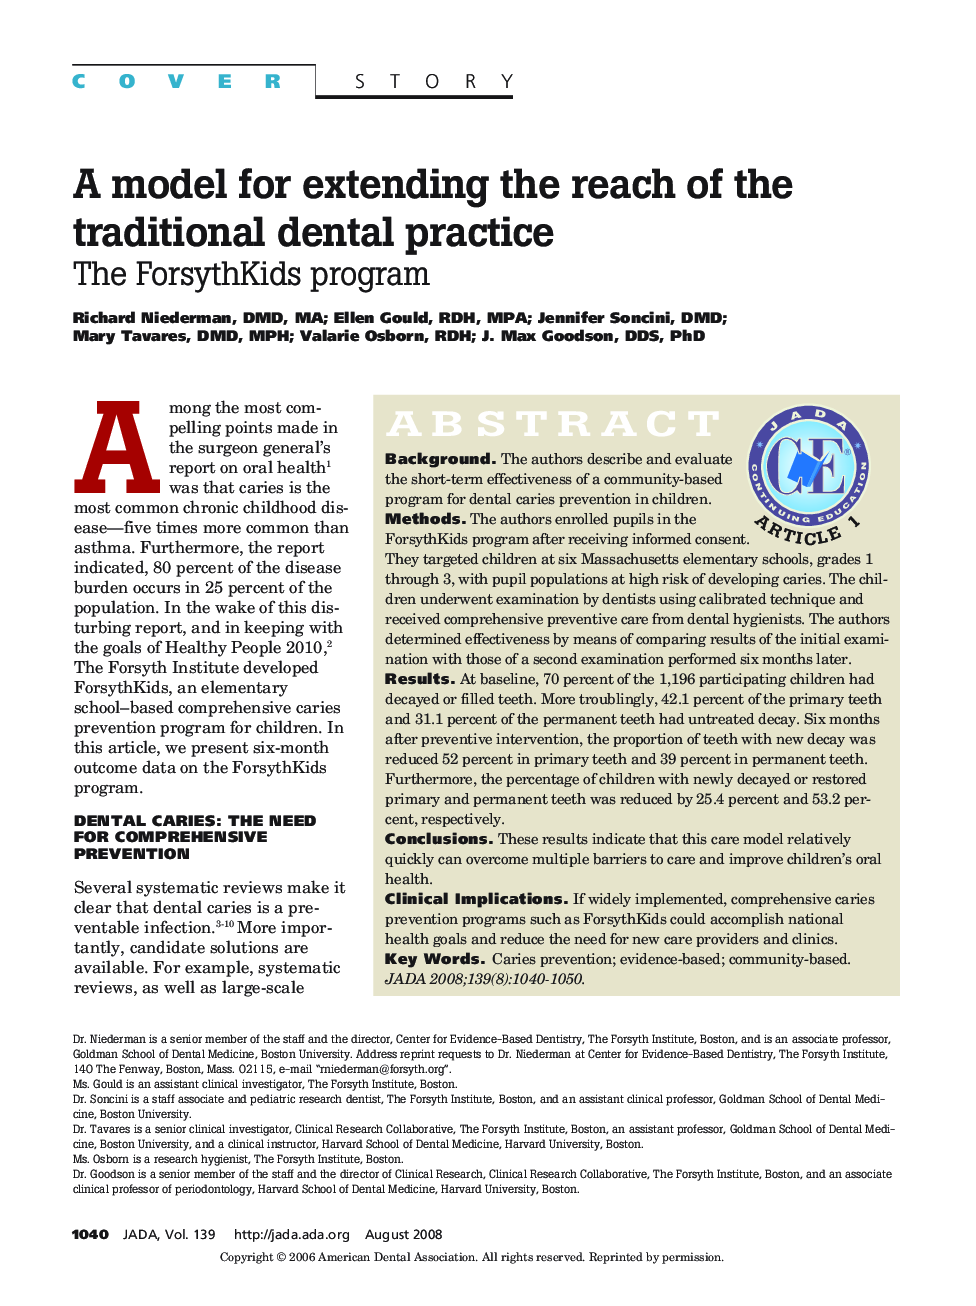 A Model for Extending the Reach of the Traditional Dental Practice